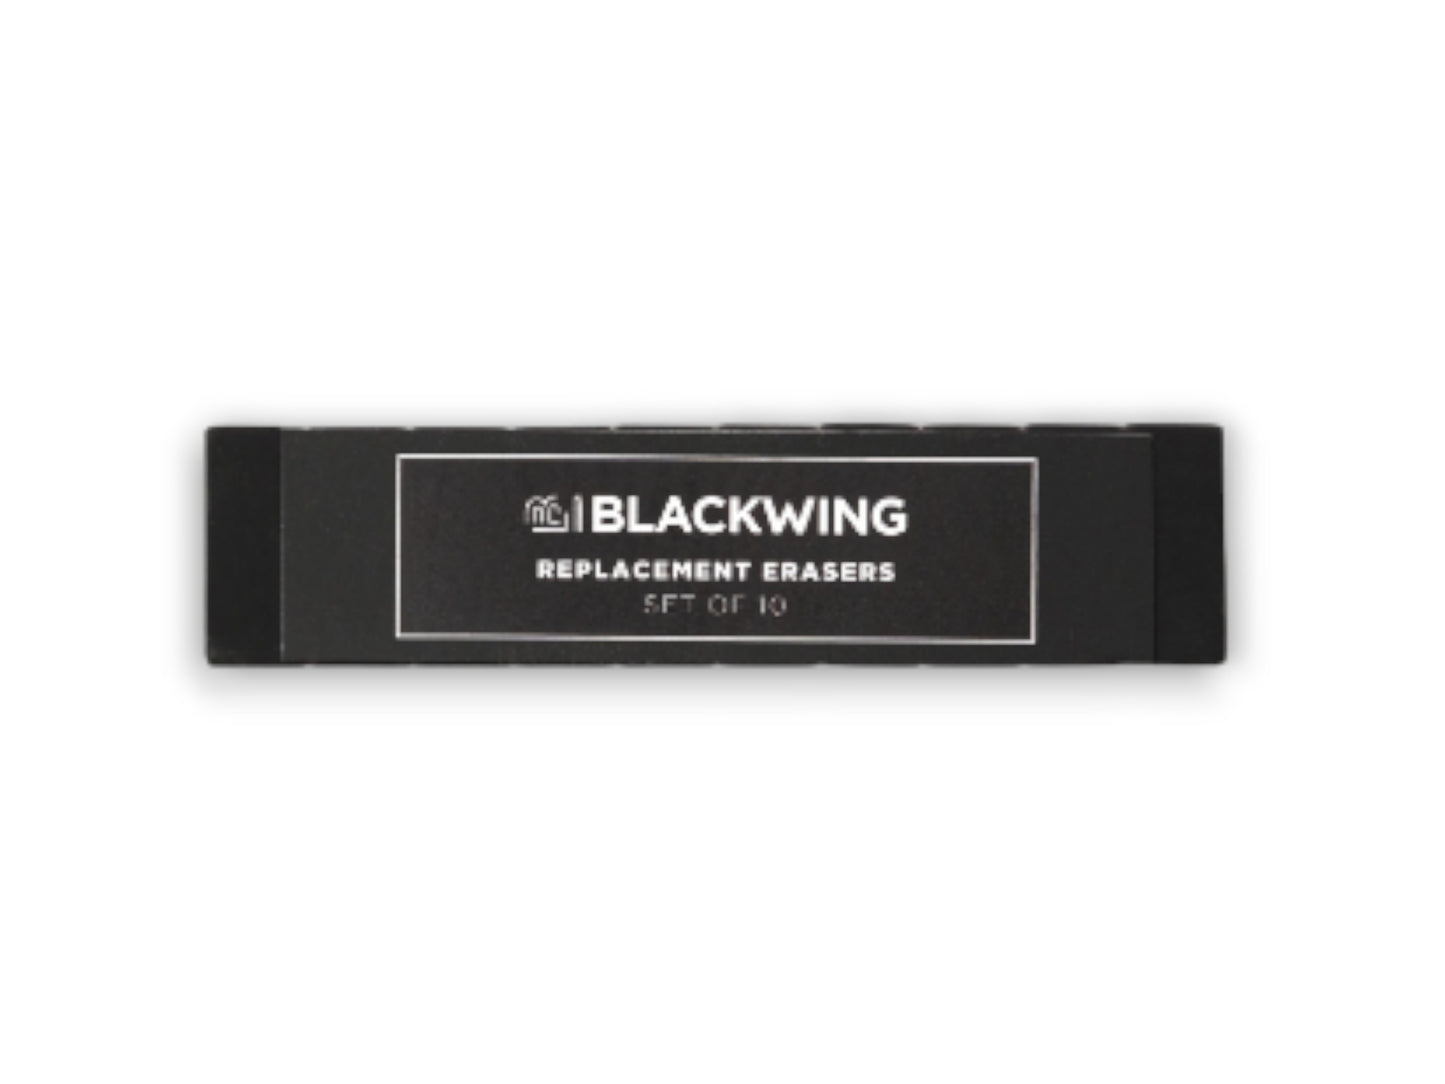 Blackwing Replacement Erasers for Blackwing Pencils